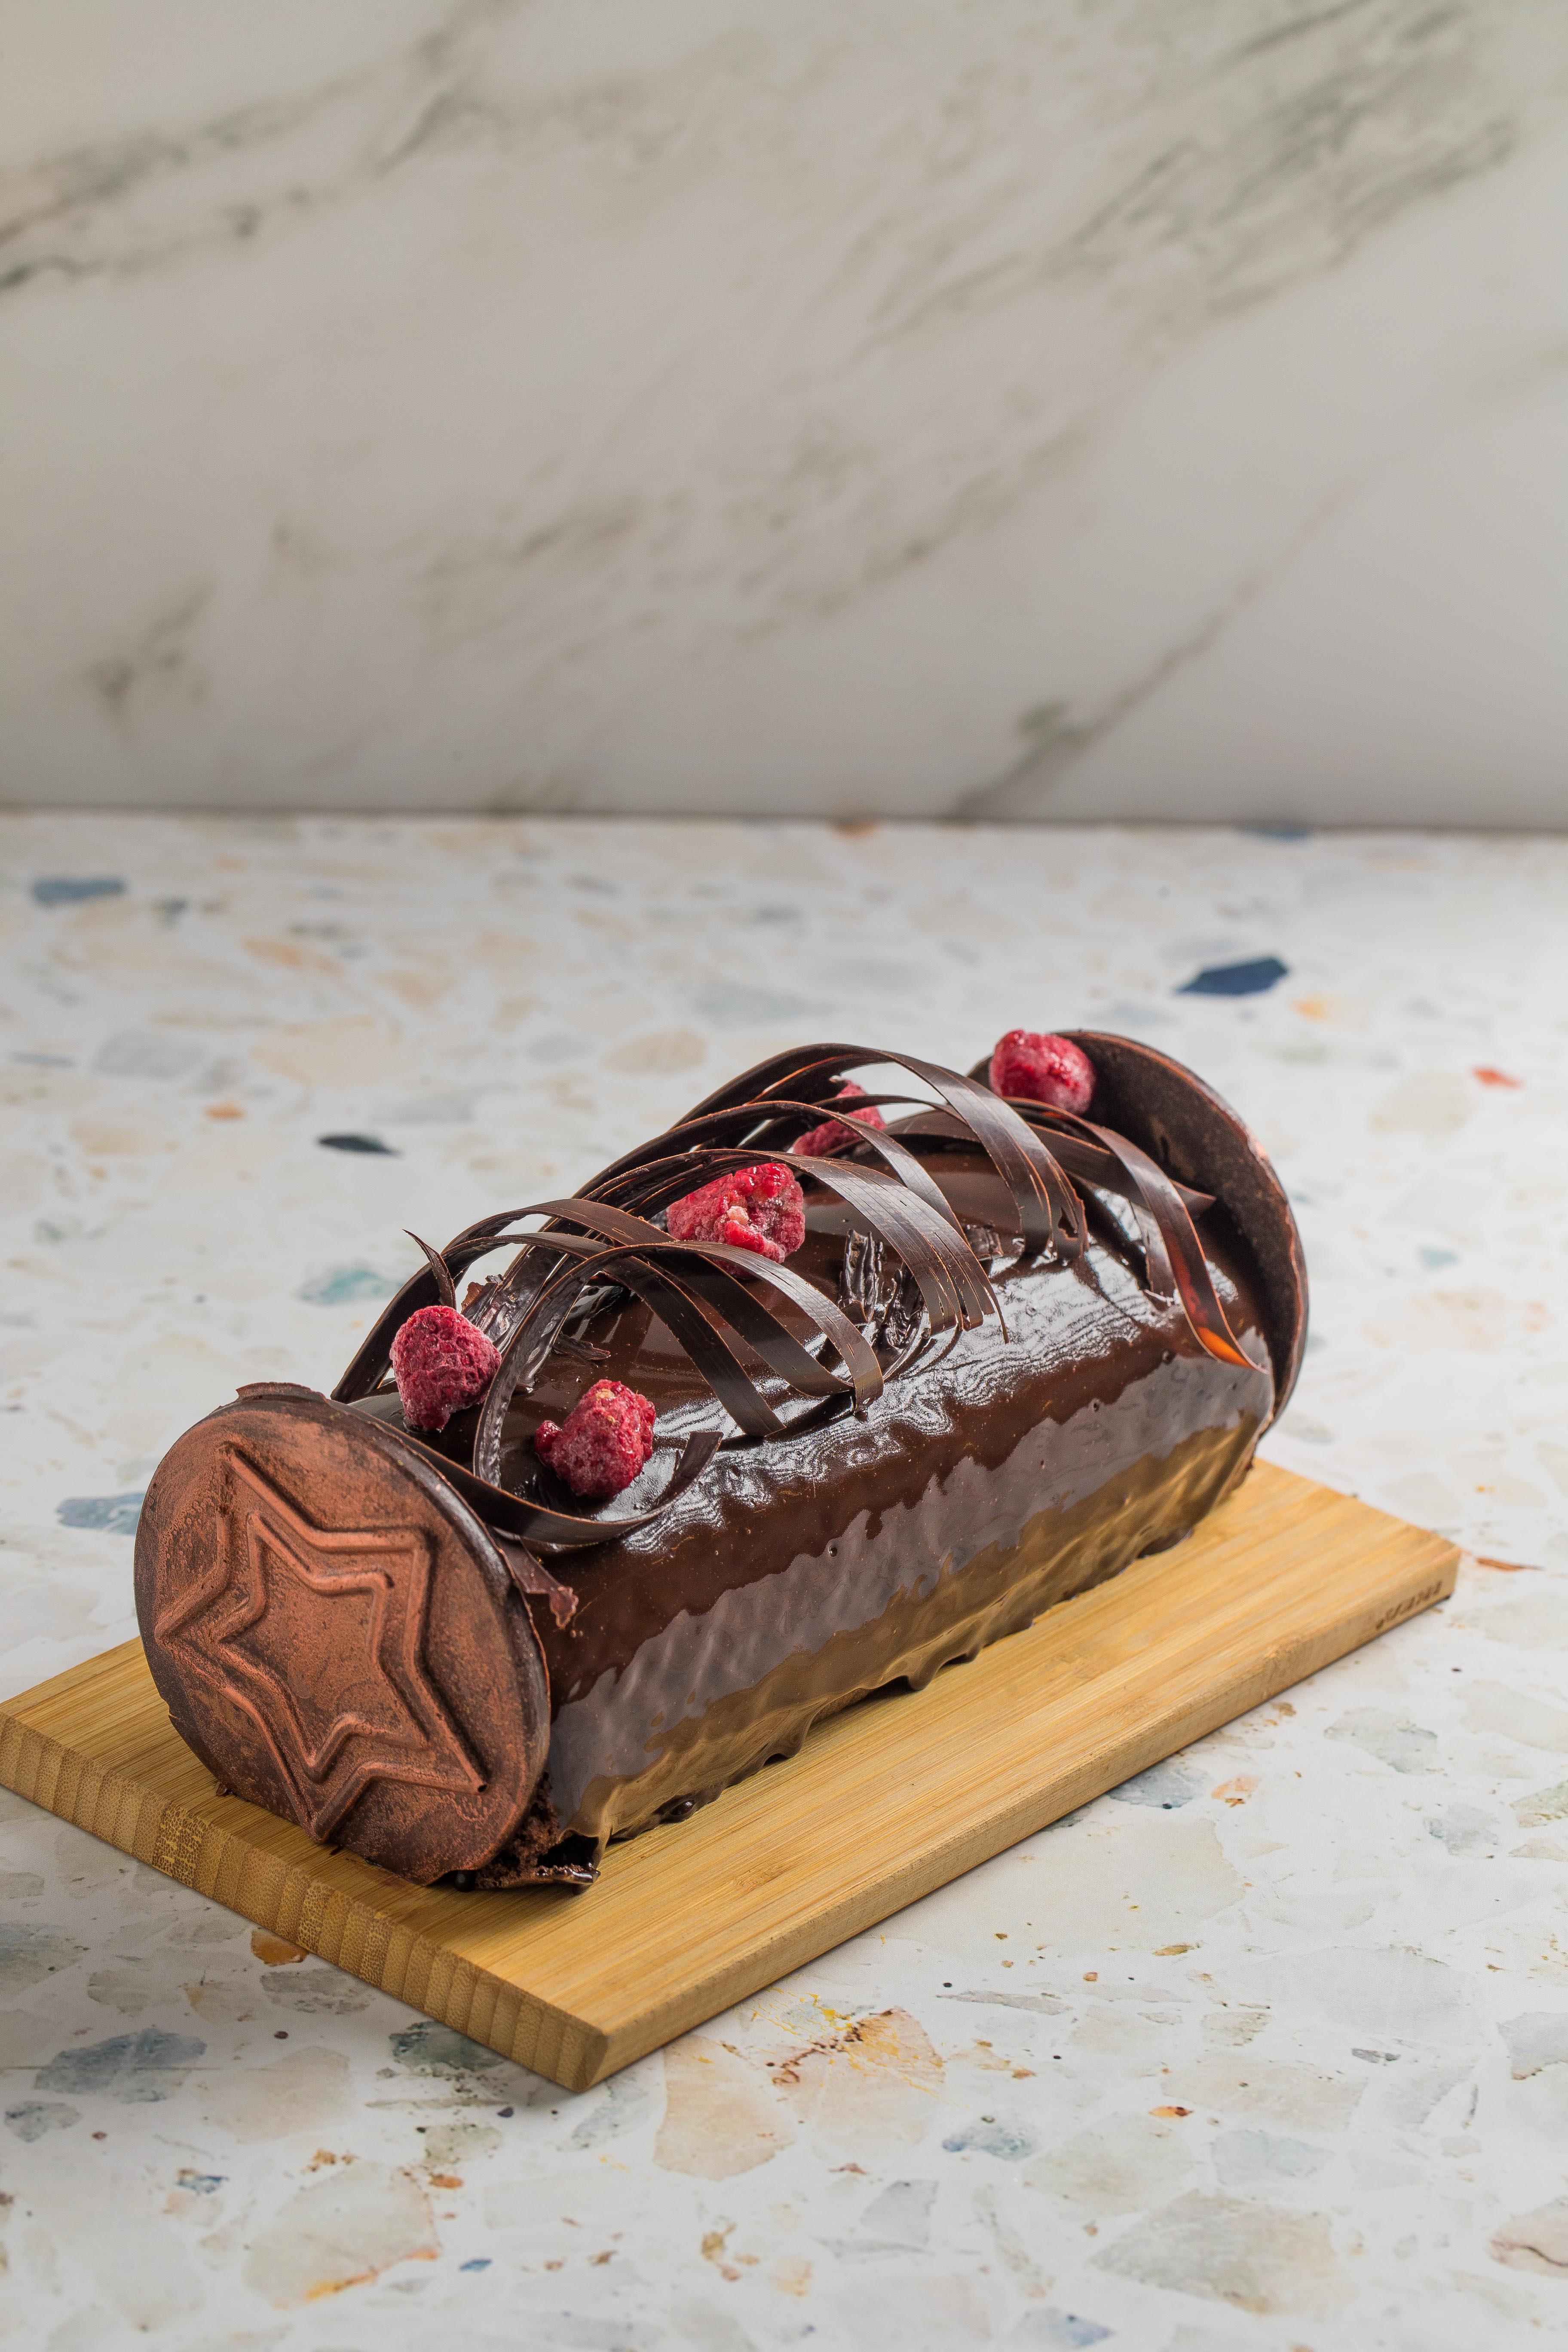 Raspberry With Chocolate Buche 8-10 Persons